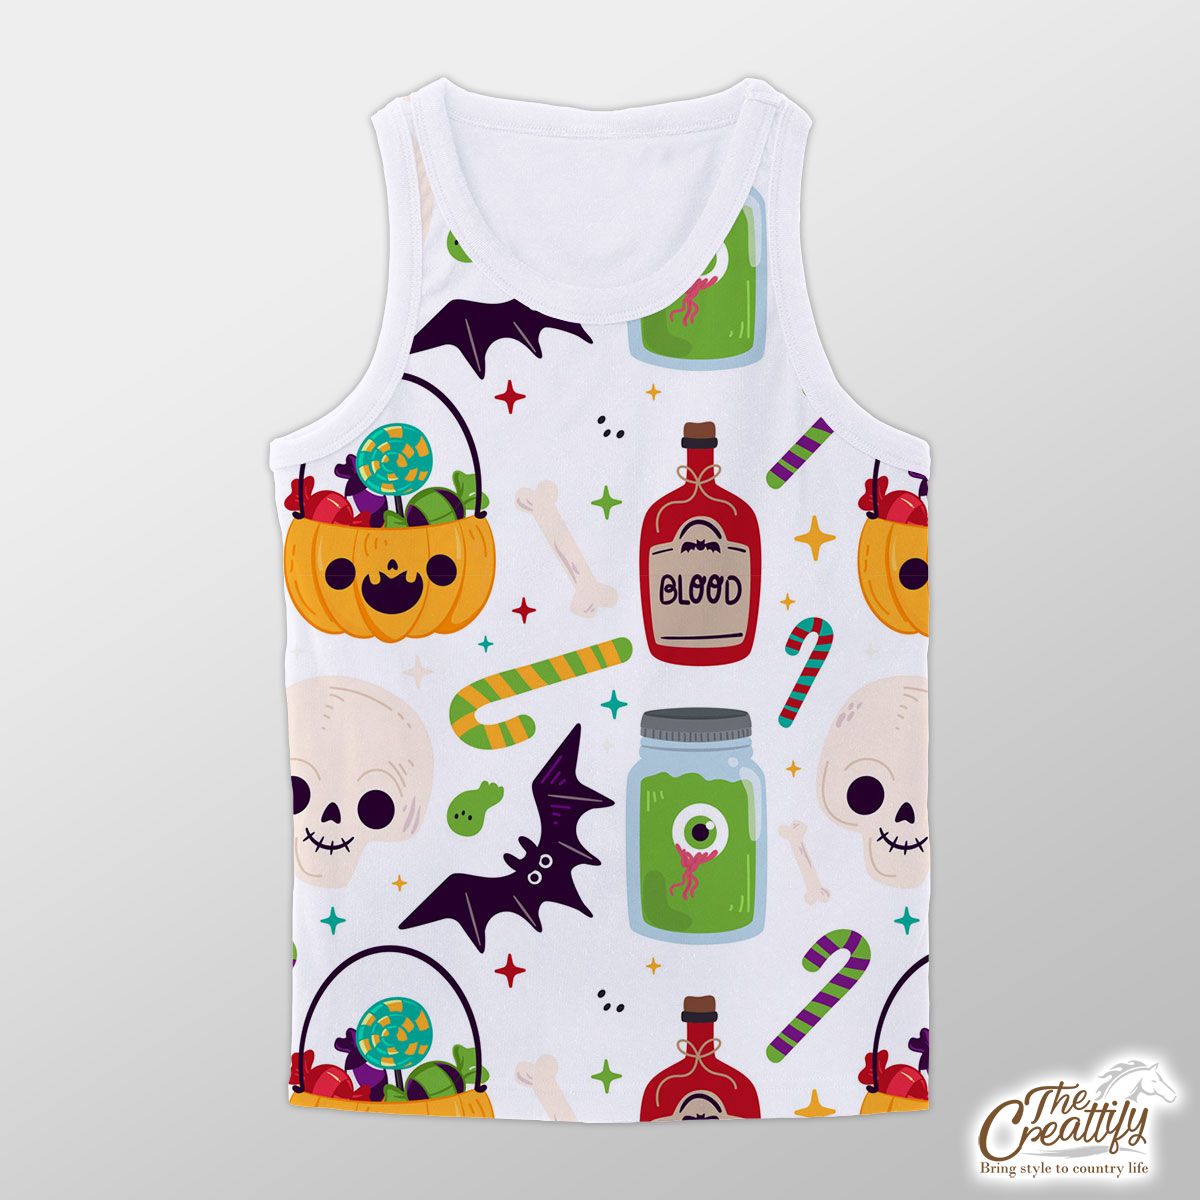 Cute Pumpkin, Jack O Lantern Full of Candy, Witch Potions and Bat White Halloween Unisex Tank Top